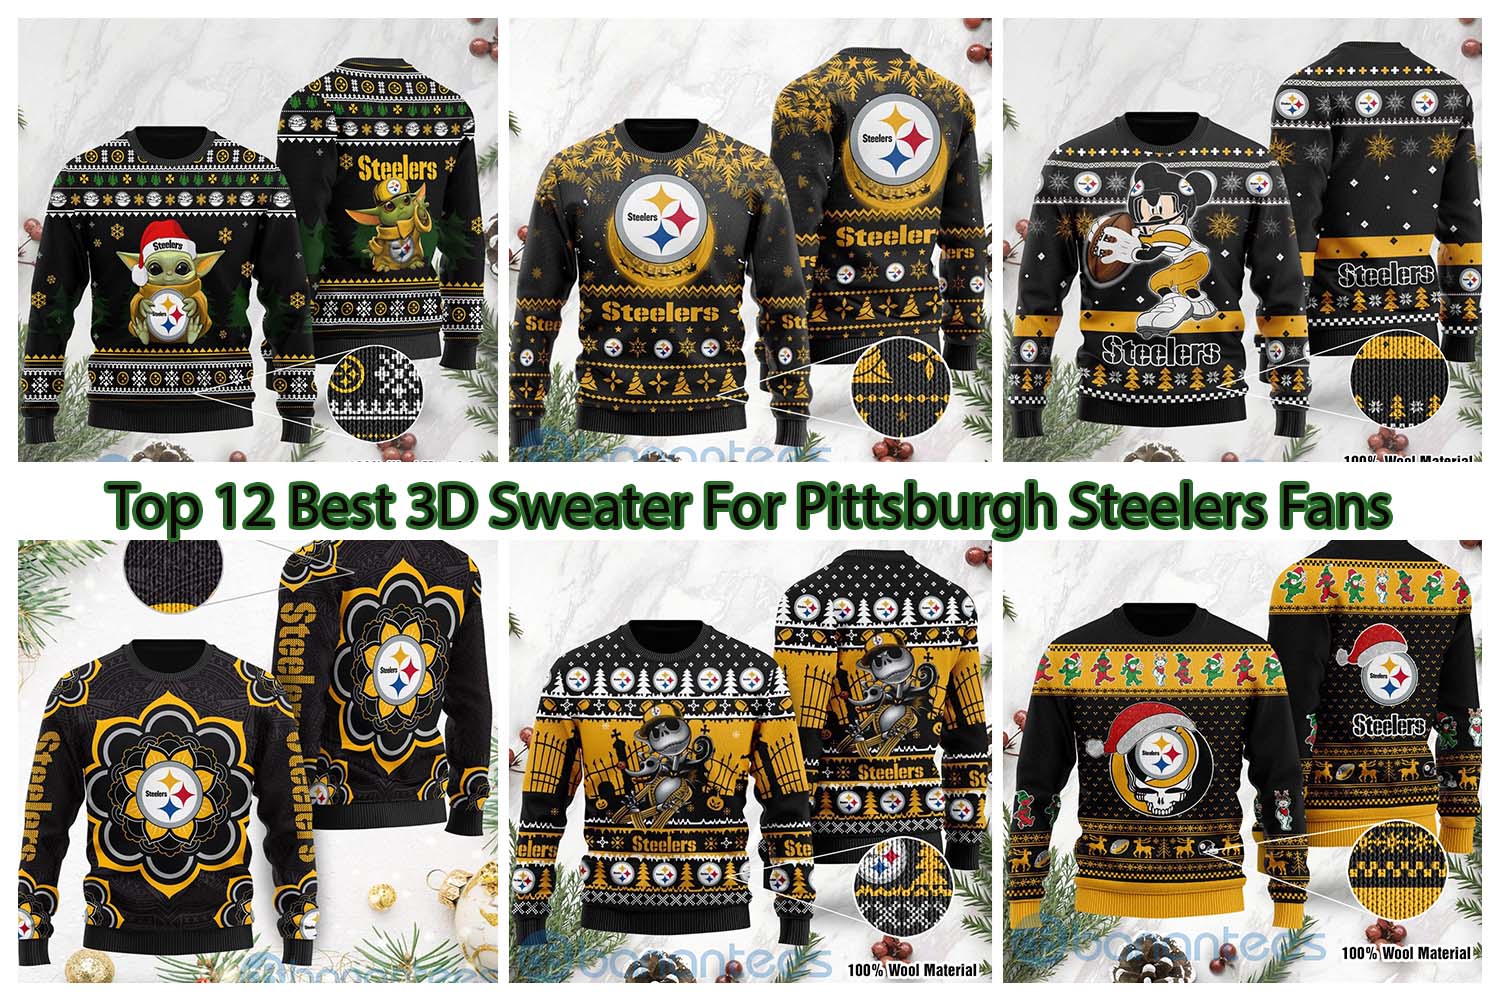 Top 12 Best 3D Sweater For Pittsburgh Steelers Fans